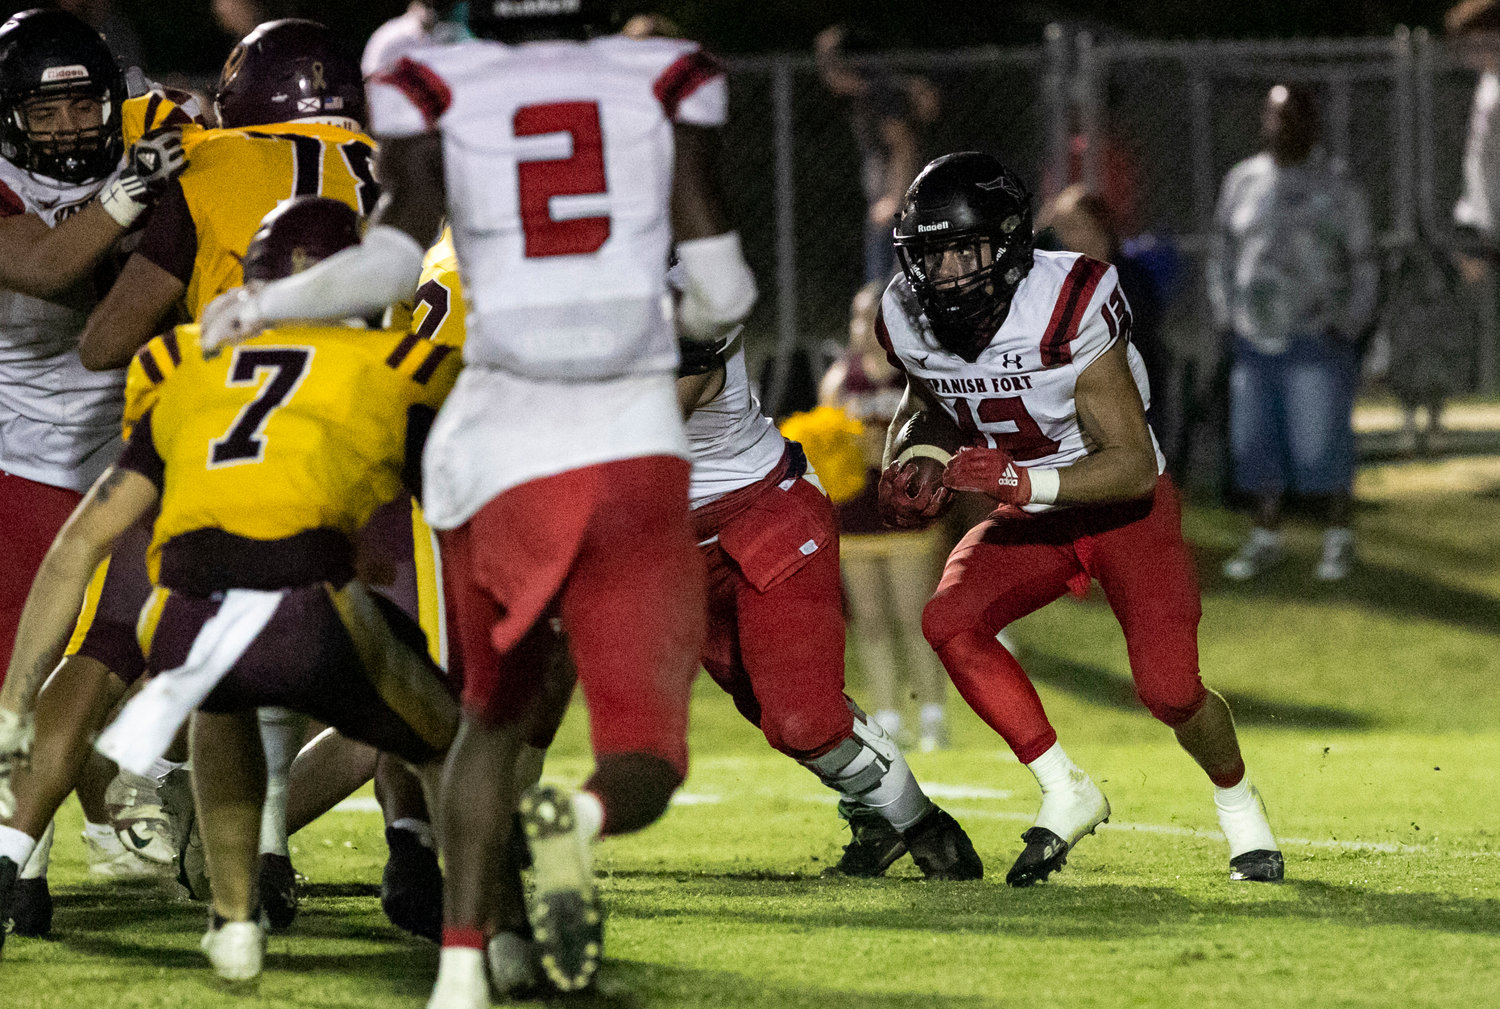 Toro running back Sawyer Wilson looks for running room during Spanish Fort’s 42-13 win over the Robertsdale Golden Bears on the road Friday night. Wilson ran for two touchdowns to help the visiting Toros emerge victoriously.